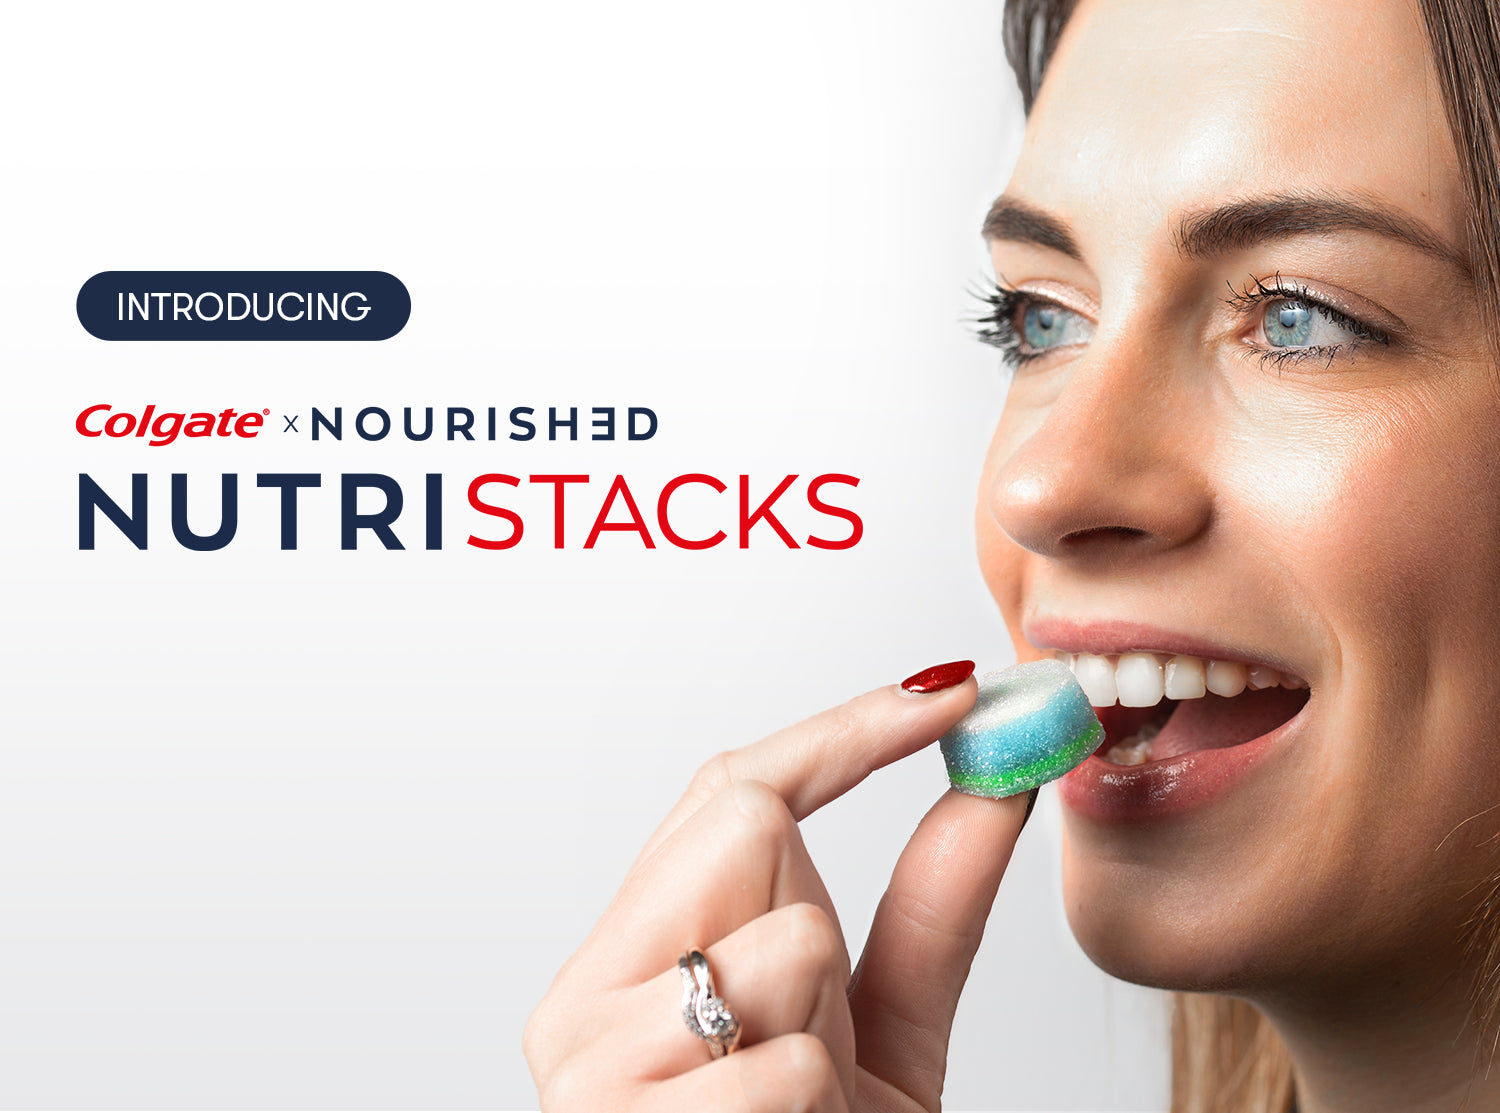 Introducing Nutristacks; in partnership with Colgate!